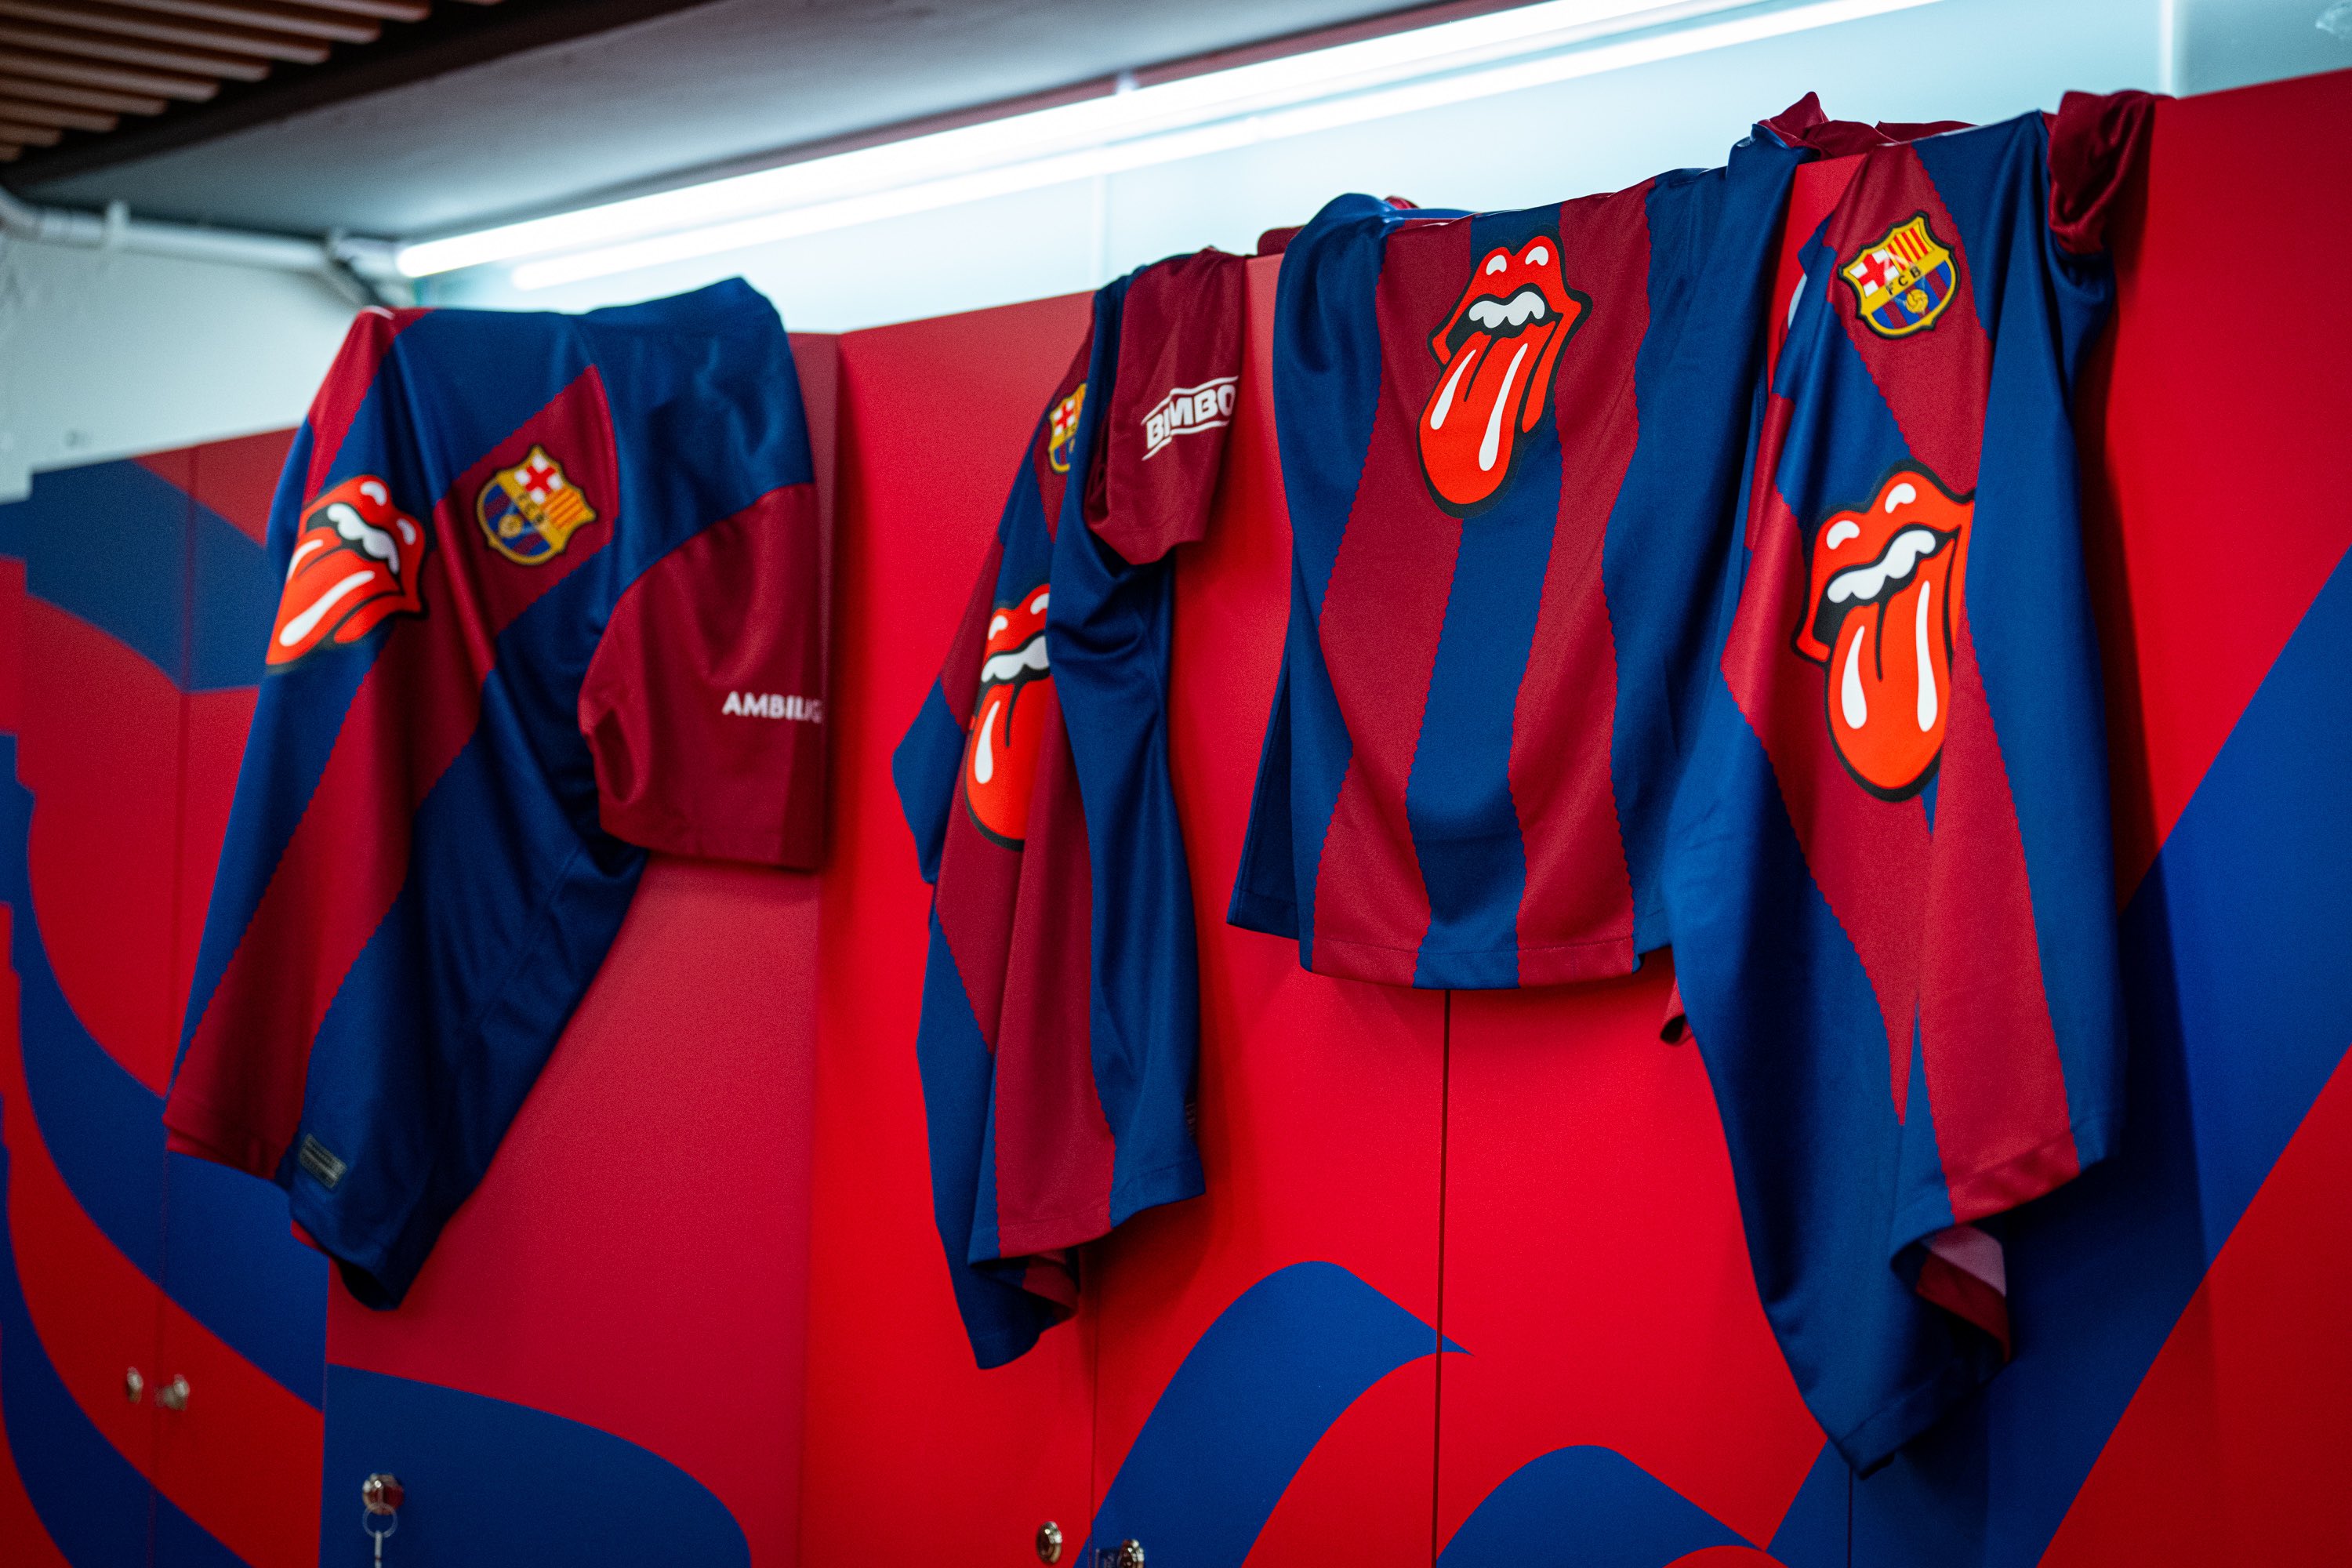 Barcelona's New Kit Causes Controversy Ahead of El Clásico Spanish club Barcelona recently unveiled a provocative jersey design for the upcoming El Clásico match against rivals Real Madrid. The revealing shirt immediately sparked controversy and debate ahead of the marquee La Liga clash on October 28.